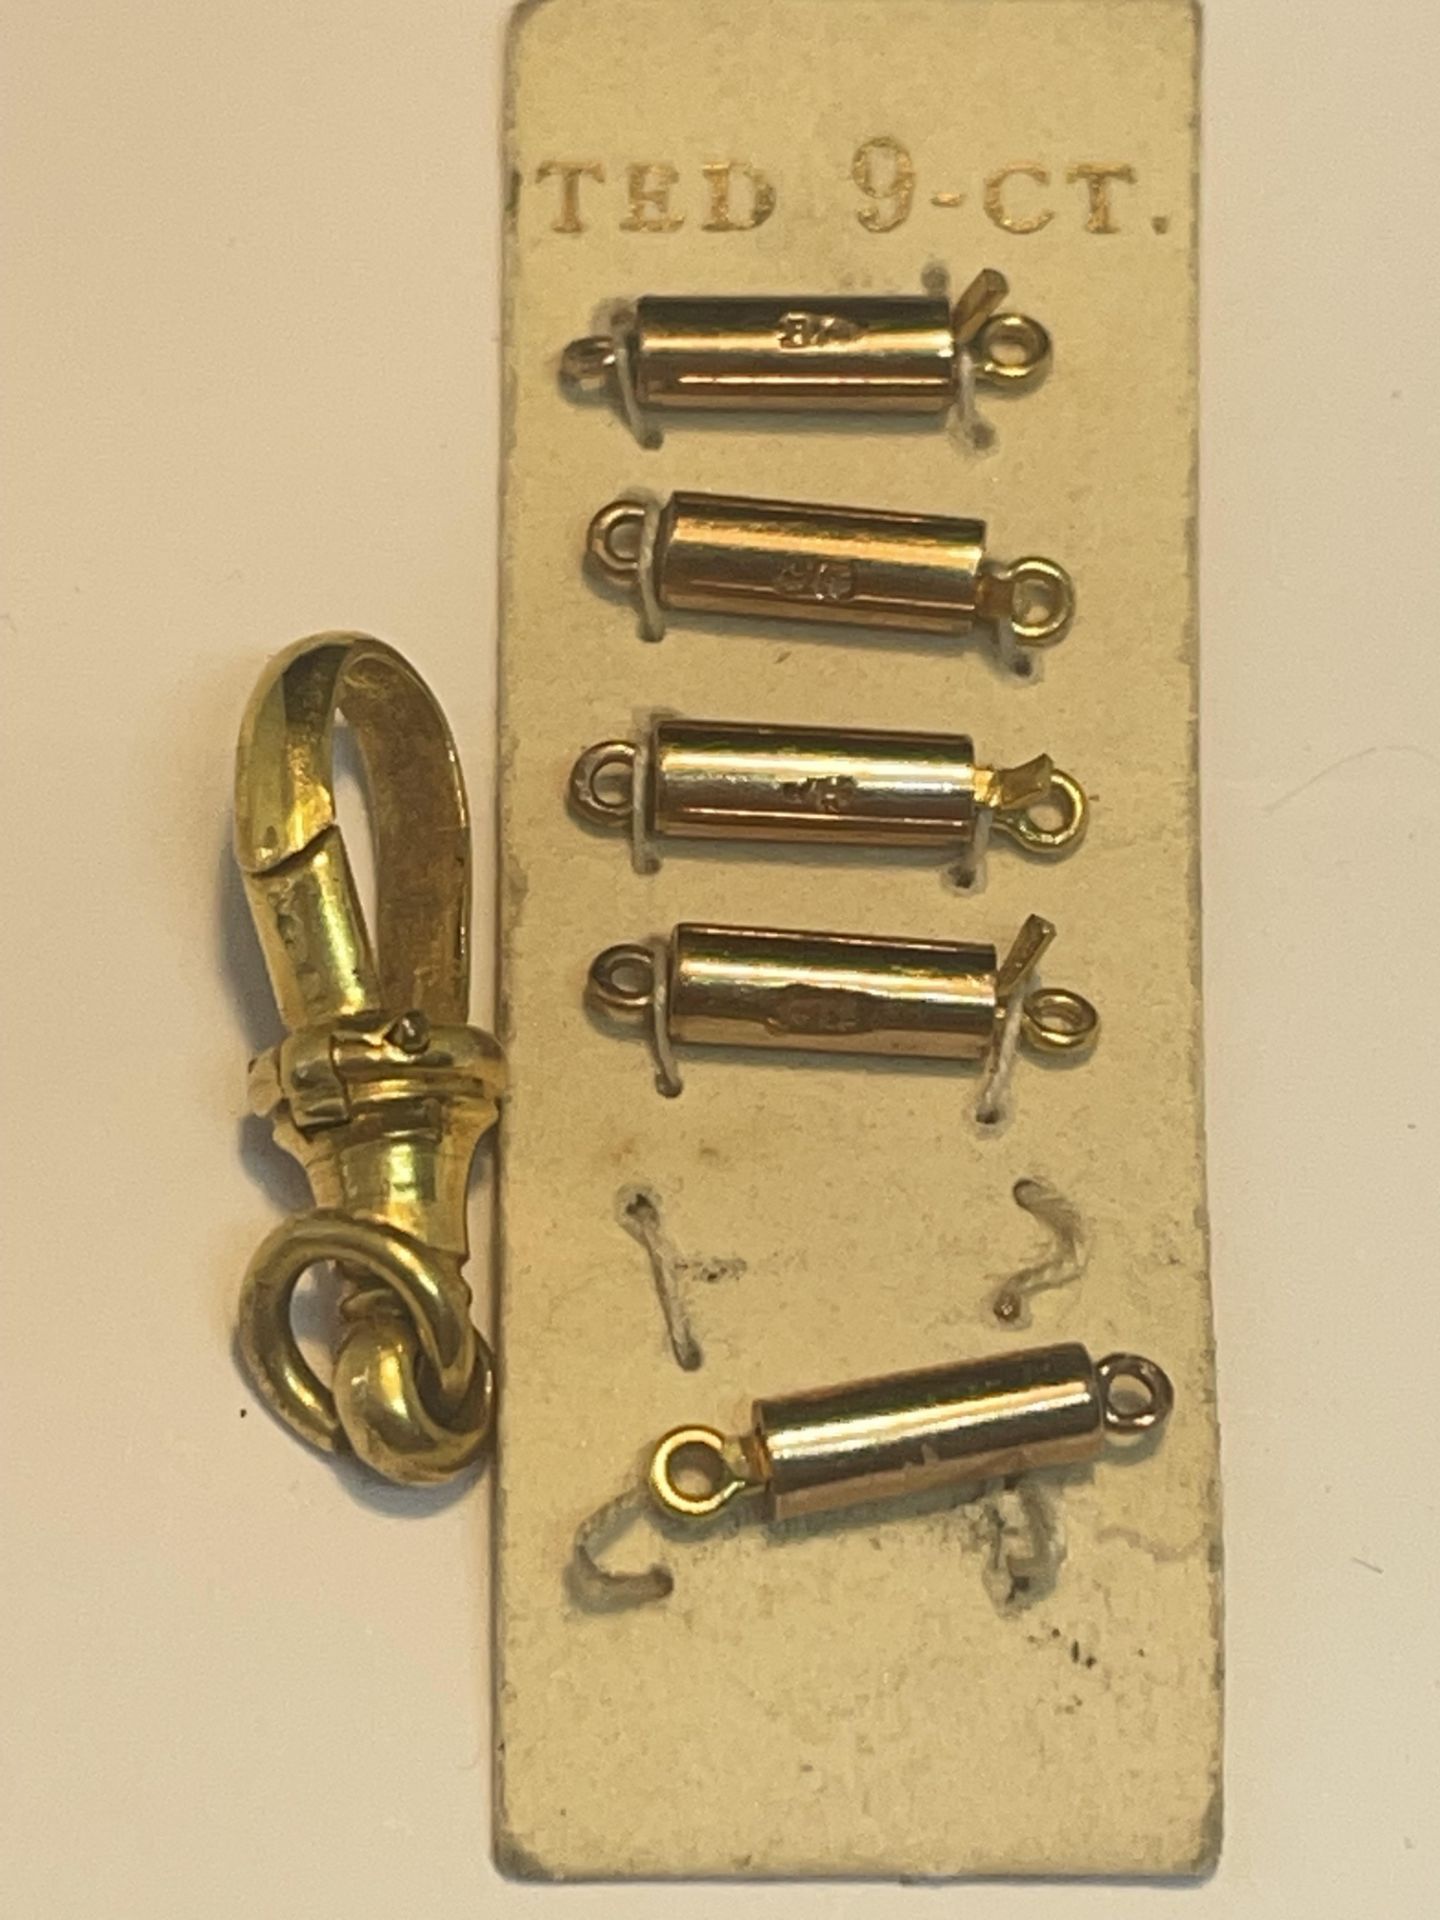 SEVEN 9 CARAT GOLD ITEMS TO INCLUDE A CROSS PENDANT, A CLIP AND FIVE FASTENERS - Image 3 of 3